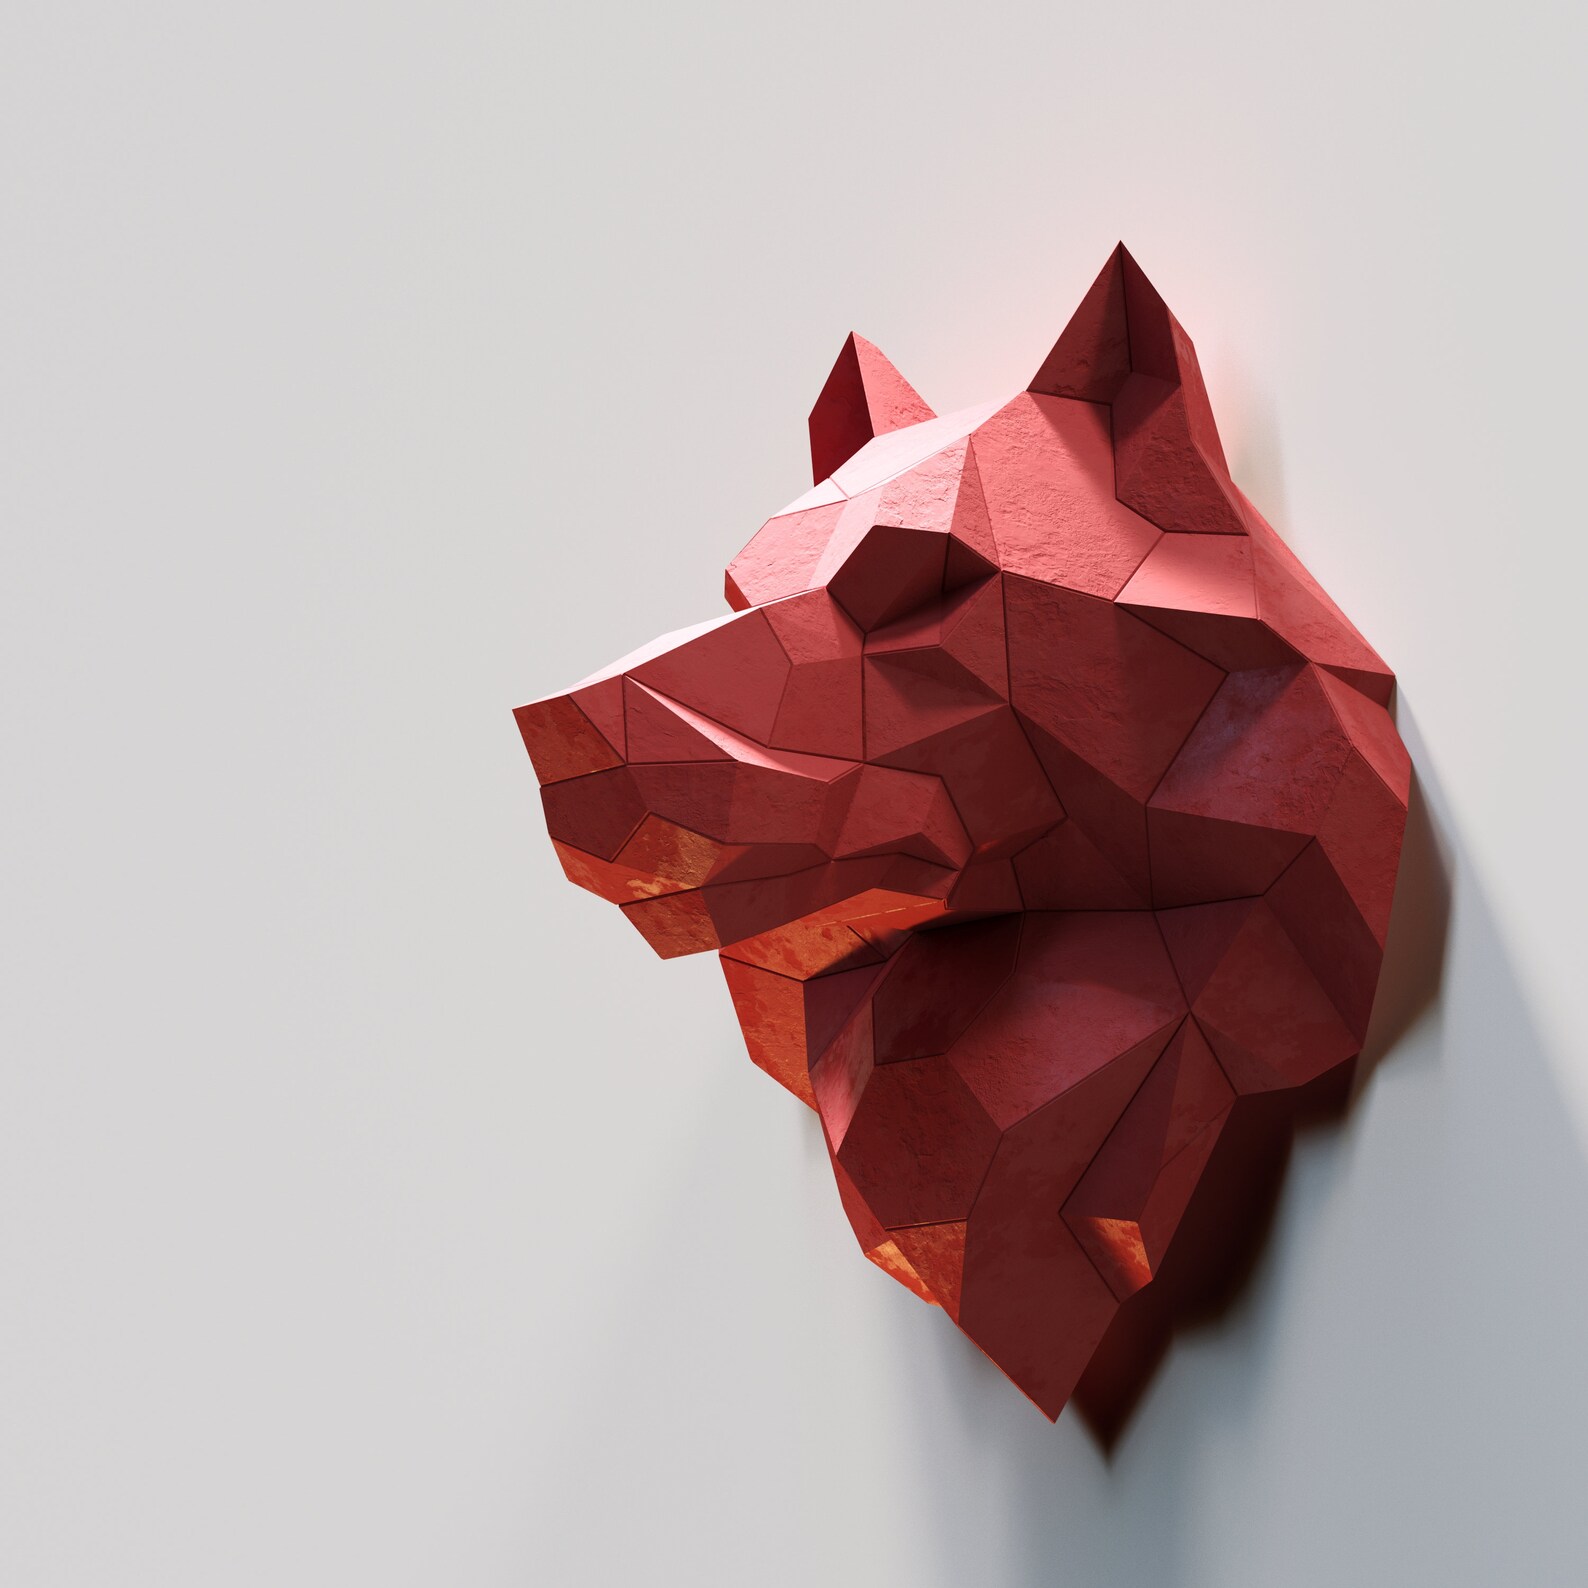 Papercraft 3D WOLF HEAD new Low Poly Paper Sculpture DIy gift | Etsy